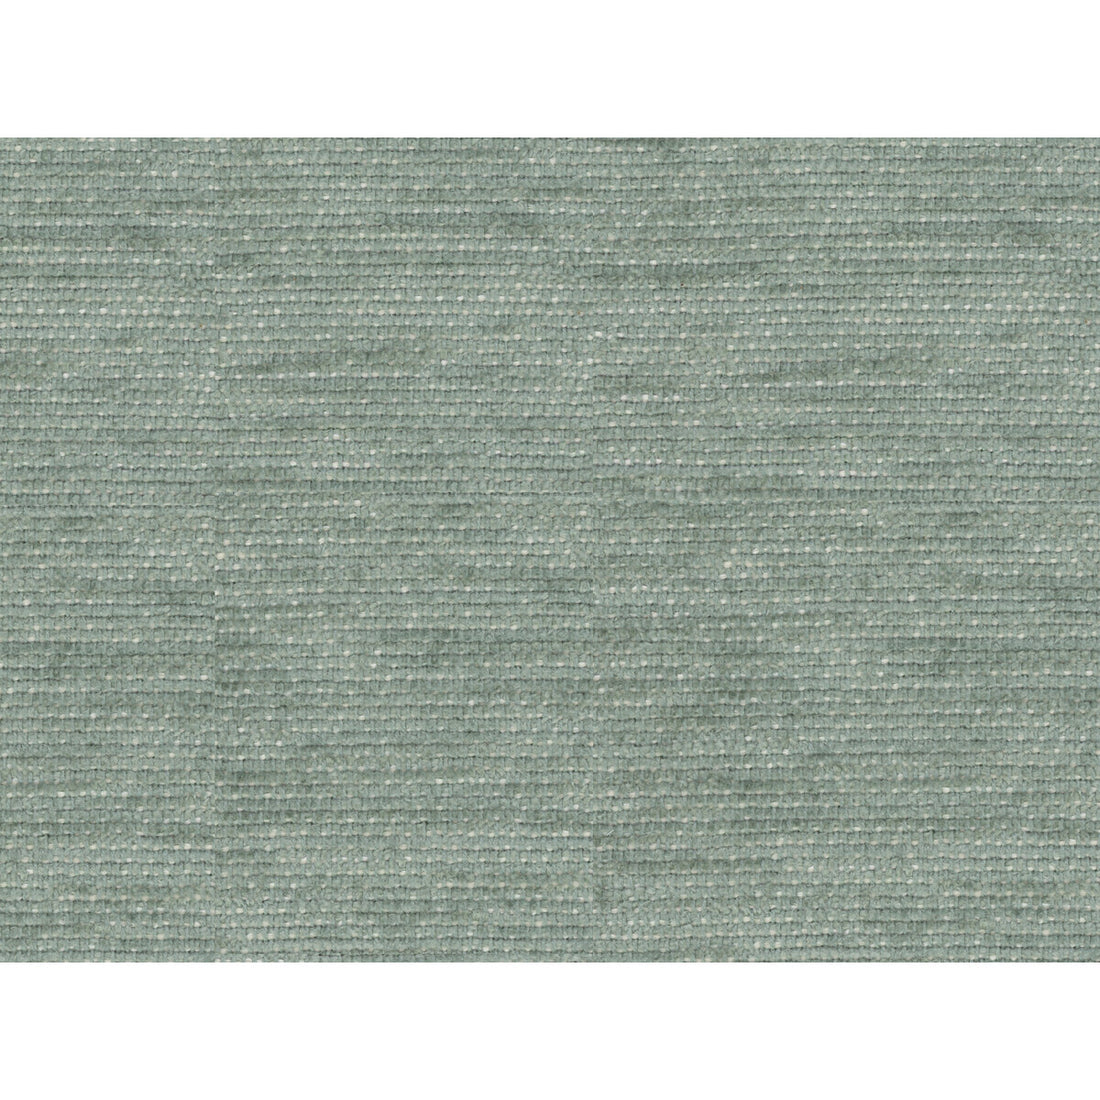 Revard Chenille fabric in aqua color - pattern 8016107.113.0 - by Brunschwig &amp; Fils in the Chambery Textures collection